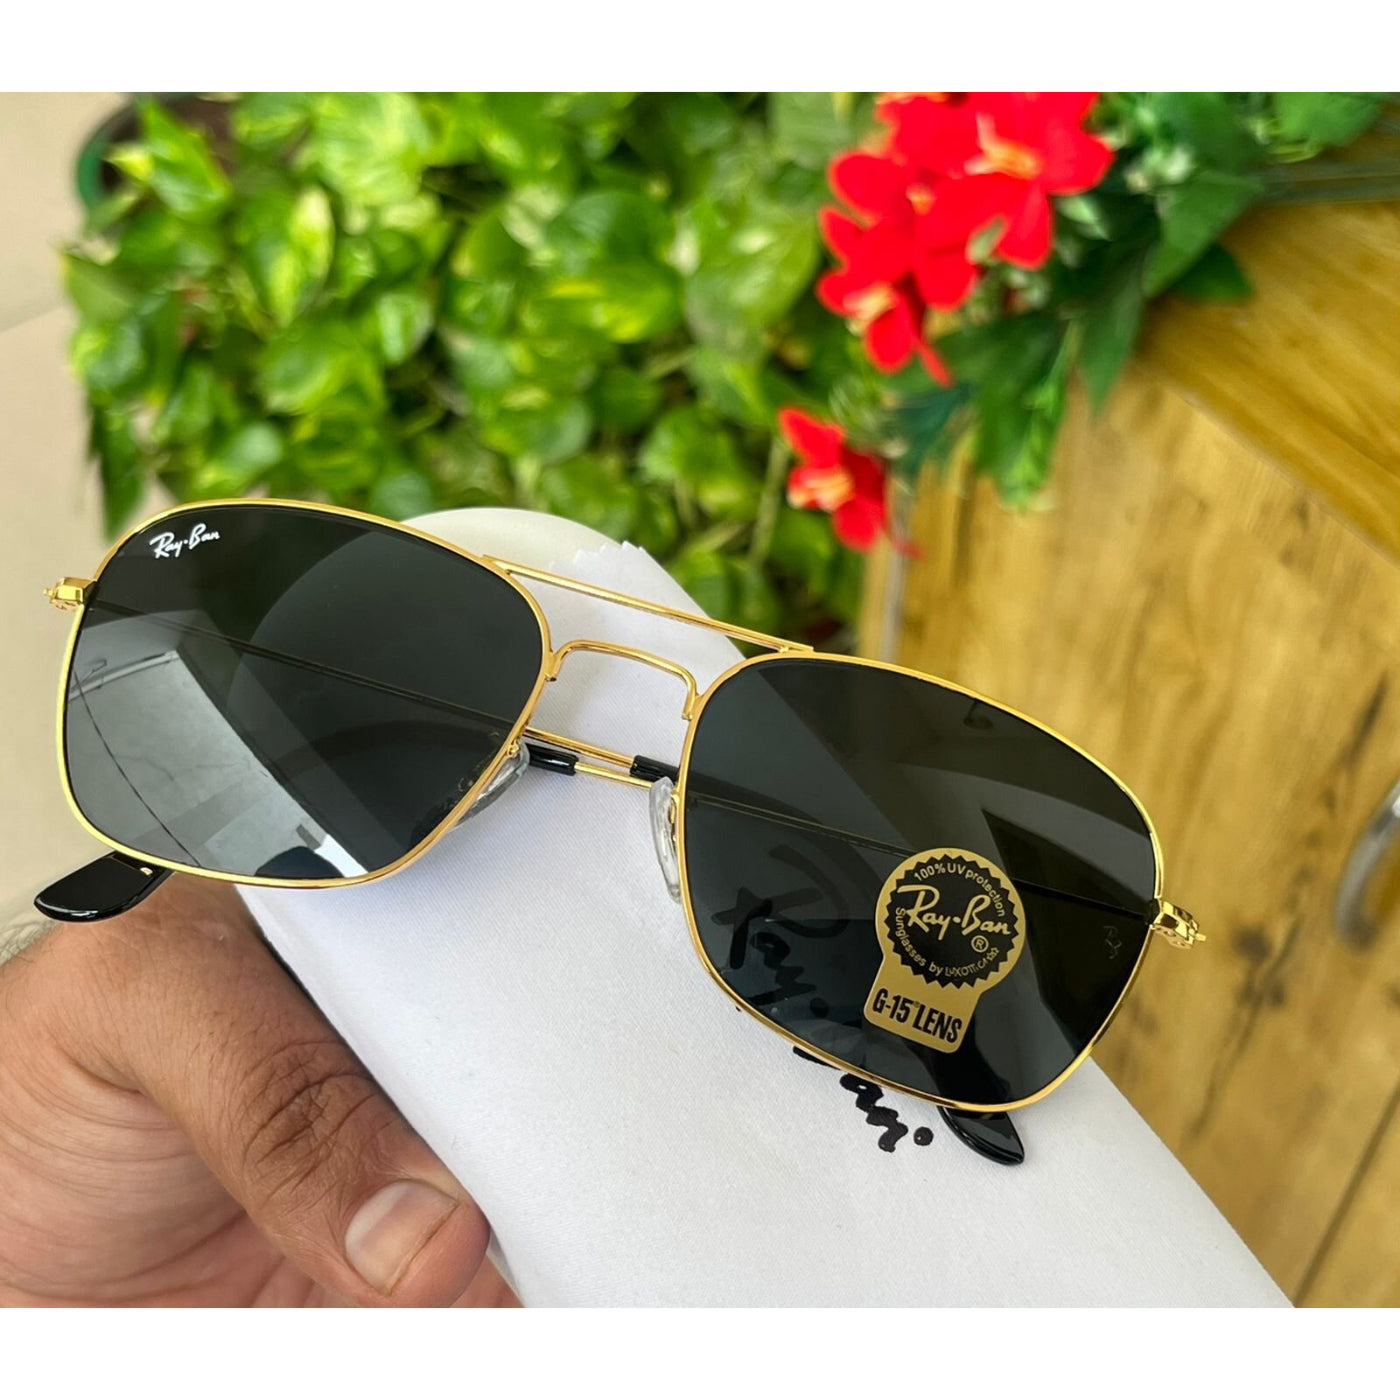 Black & Gold 3136 Square Aviator Metal Trendy Hot Favourite Wintage Sunglass For Unisex.